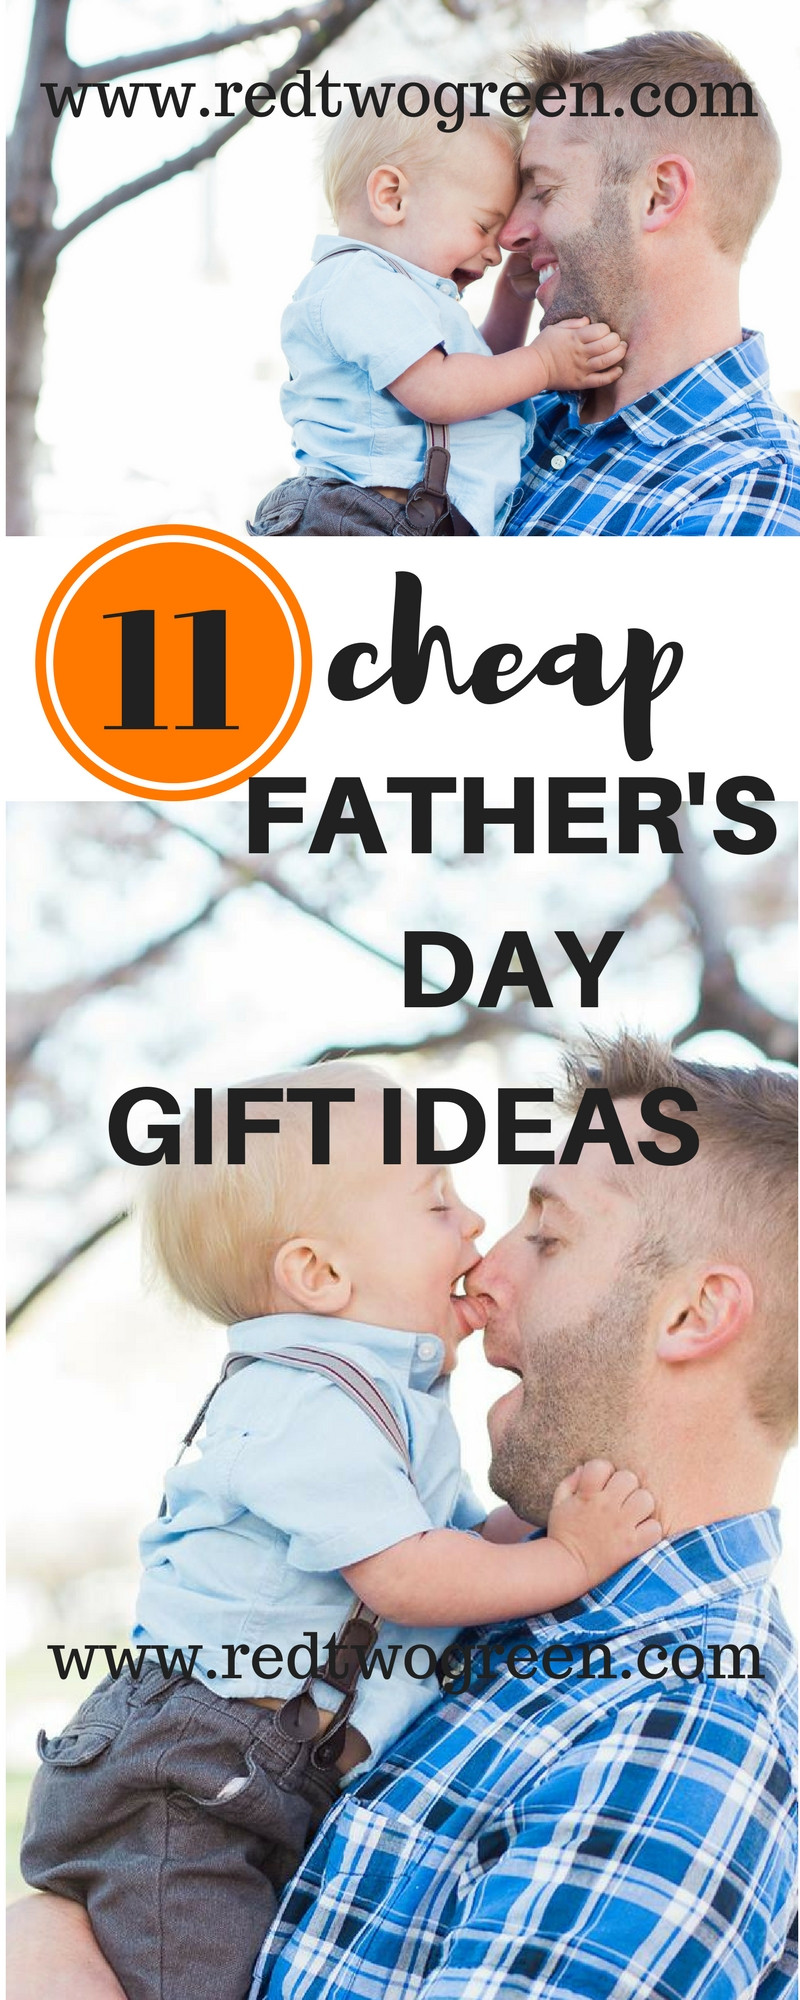 Cheap Fathers Day Ideas
 11 CHEAP FATHER S DAY GIFT IDEAS – Red Two Green